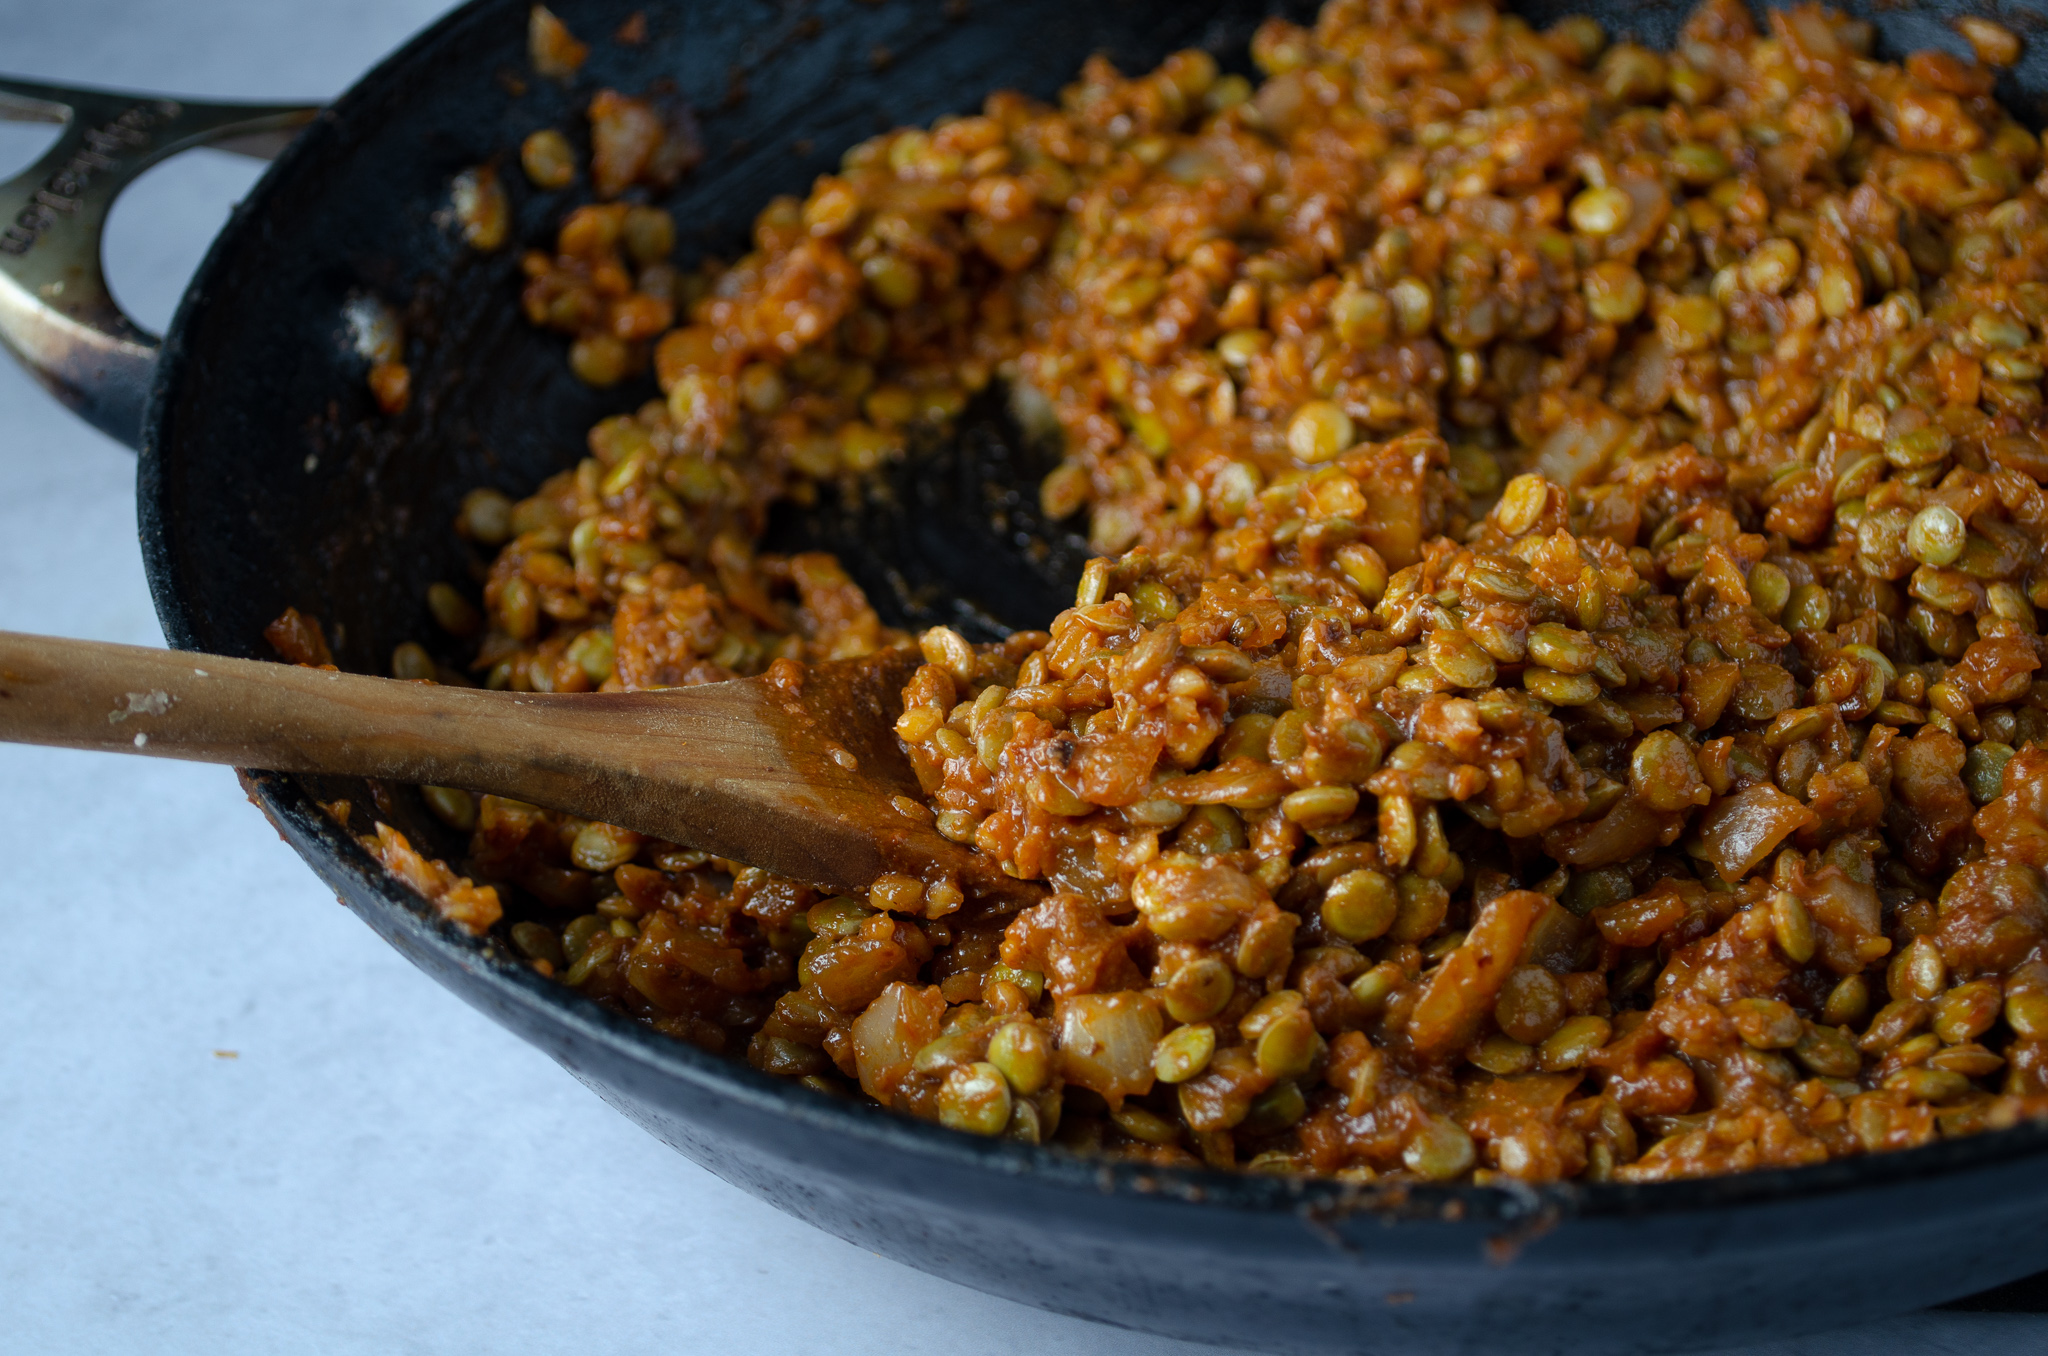 Classic sloppy joe mix recipe made meat-free from lentils and walnuts. Easy, healthy, filling, plant-based, dairy-free, vegan recipe